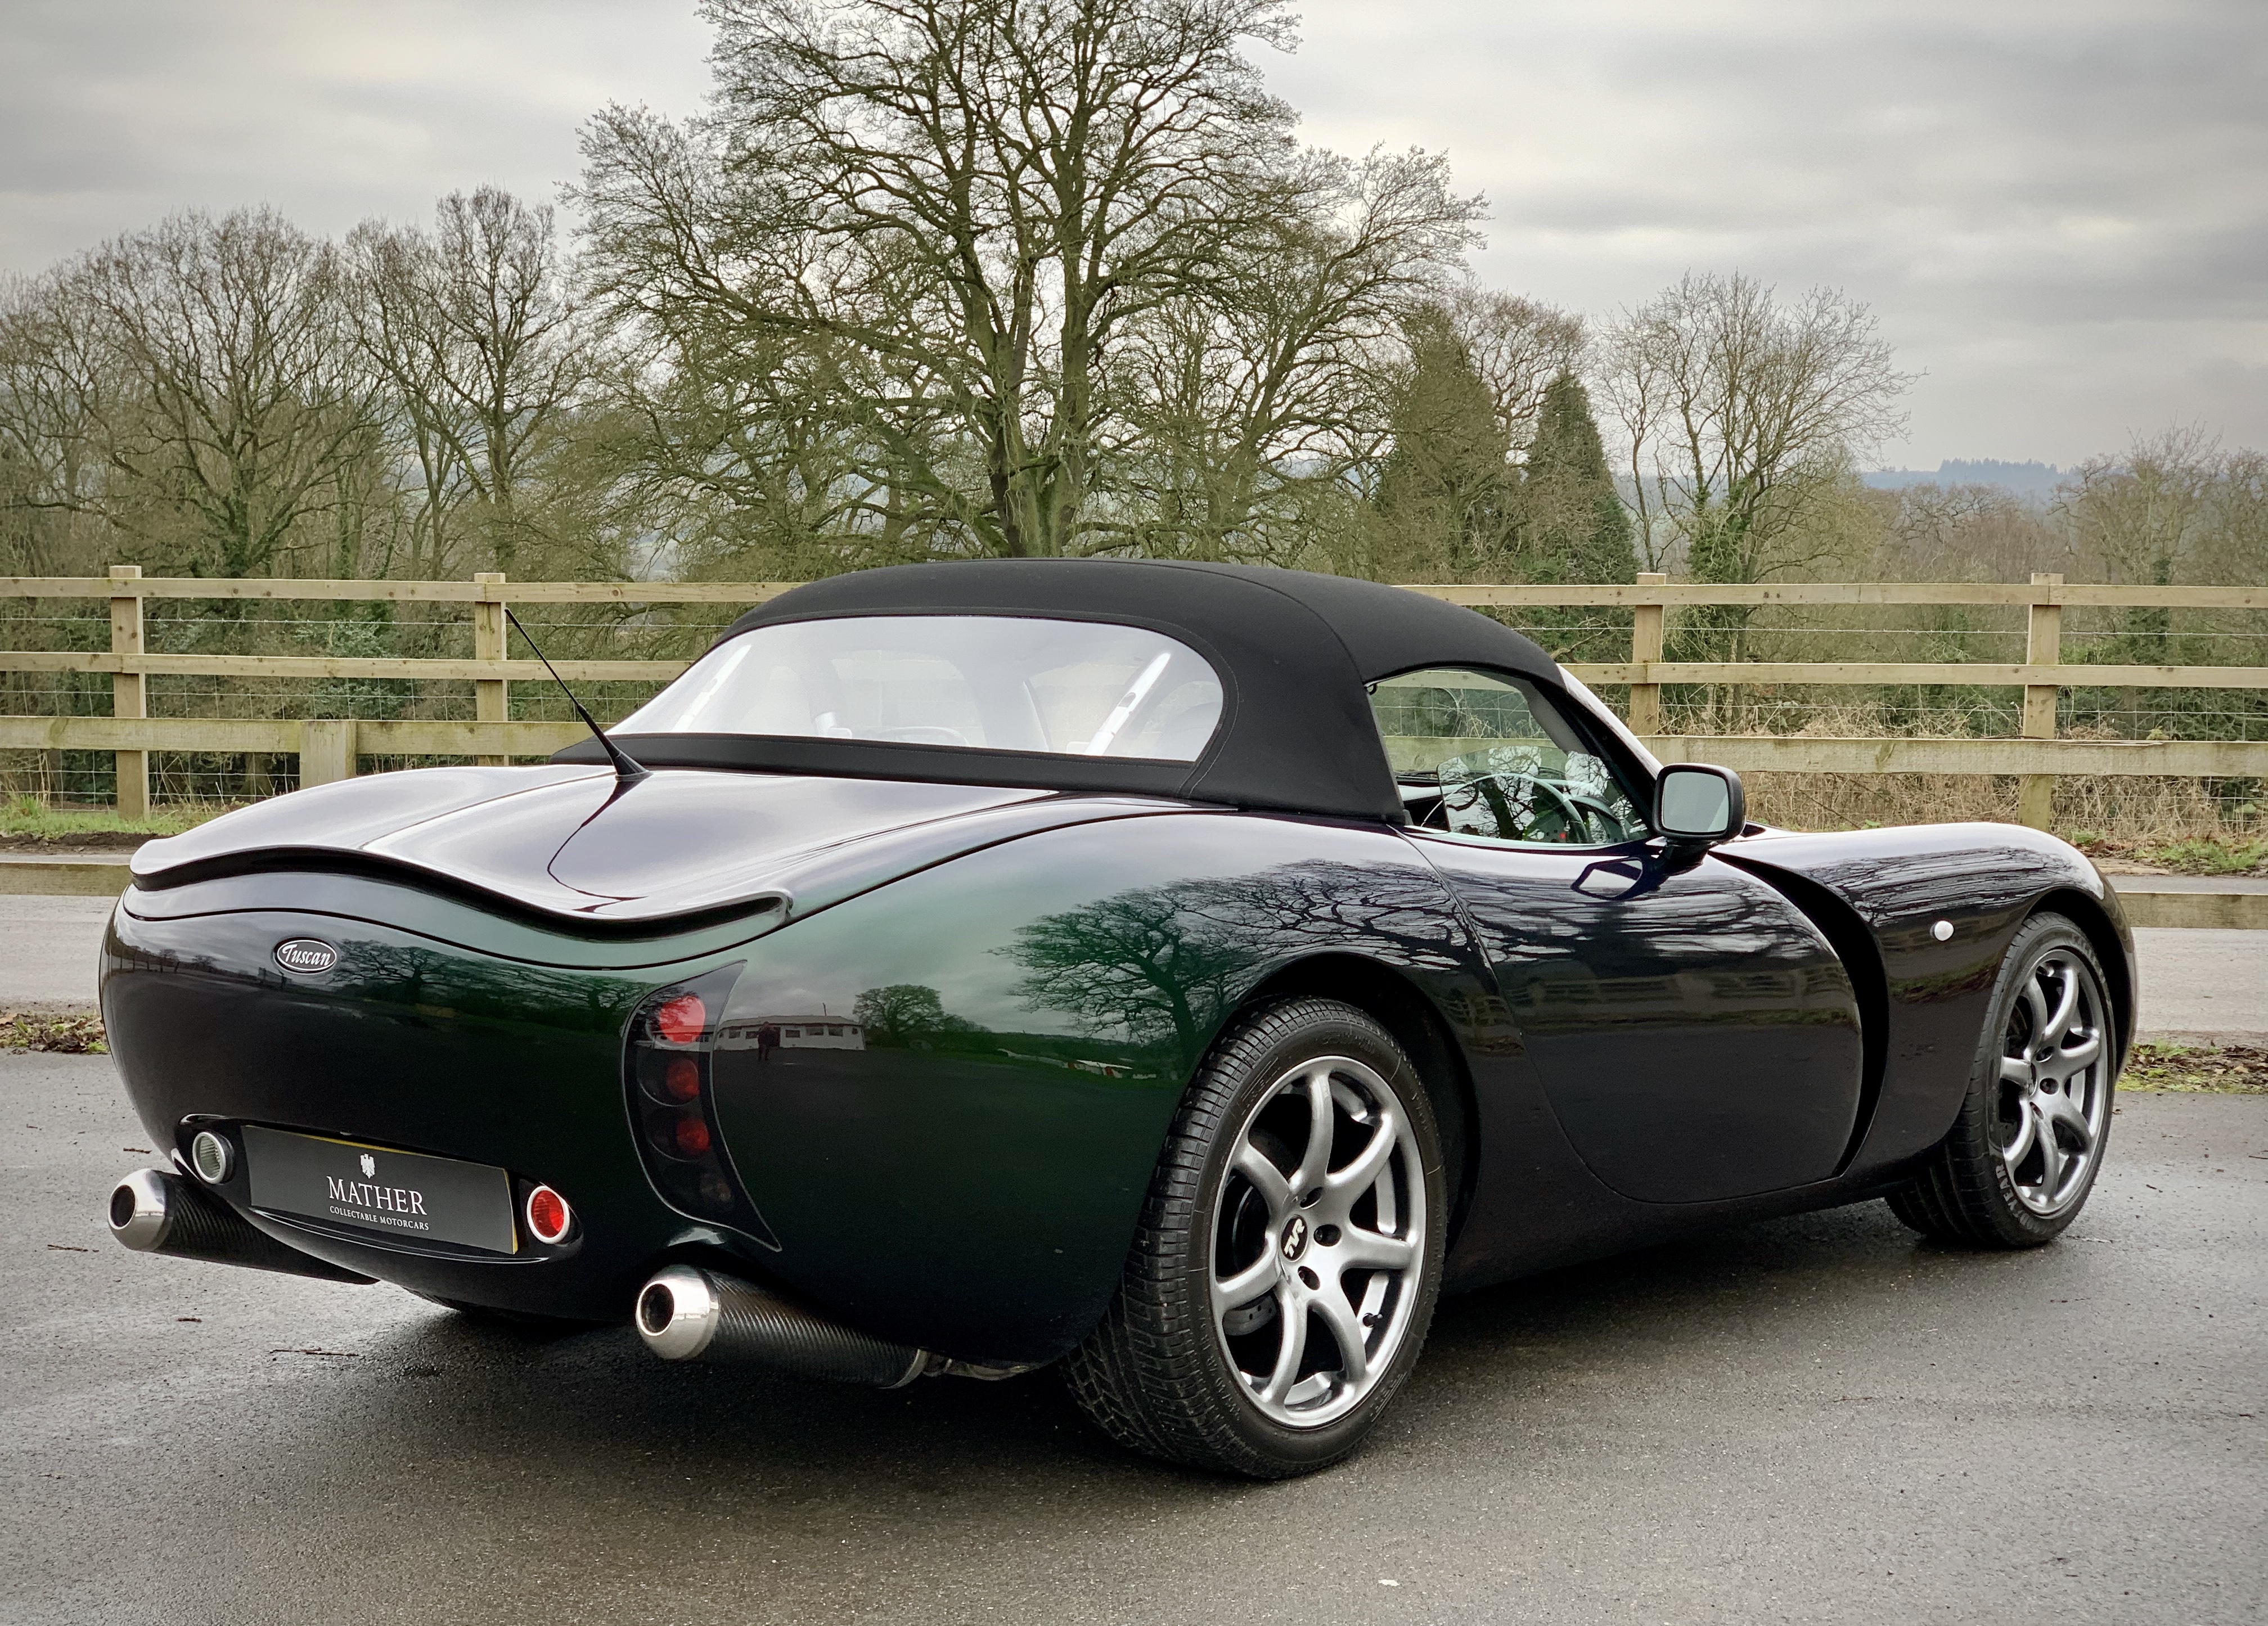 2006 TVR Tuscan S